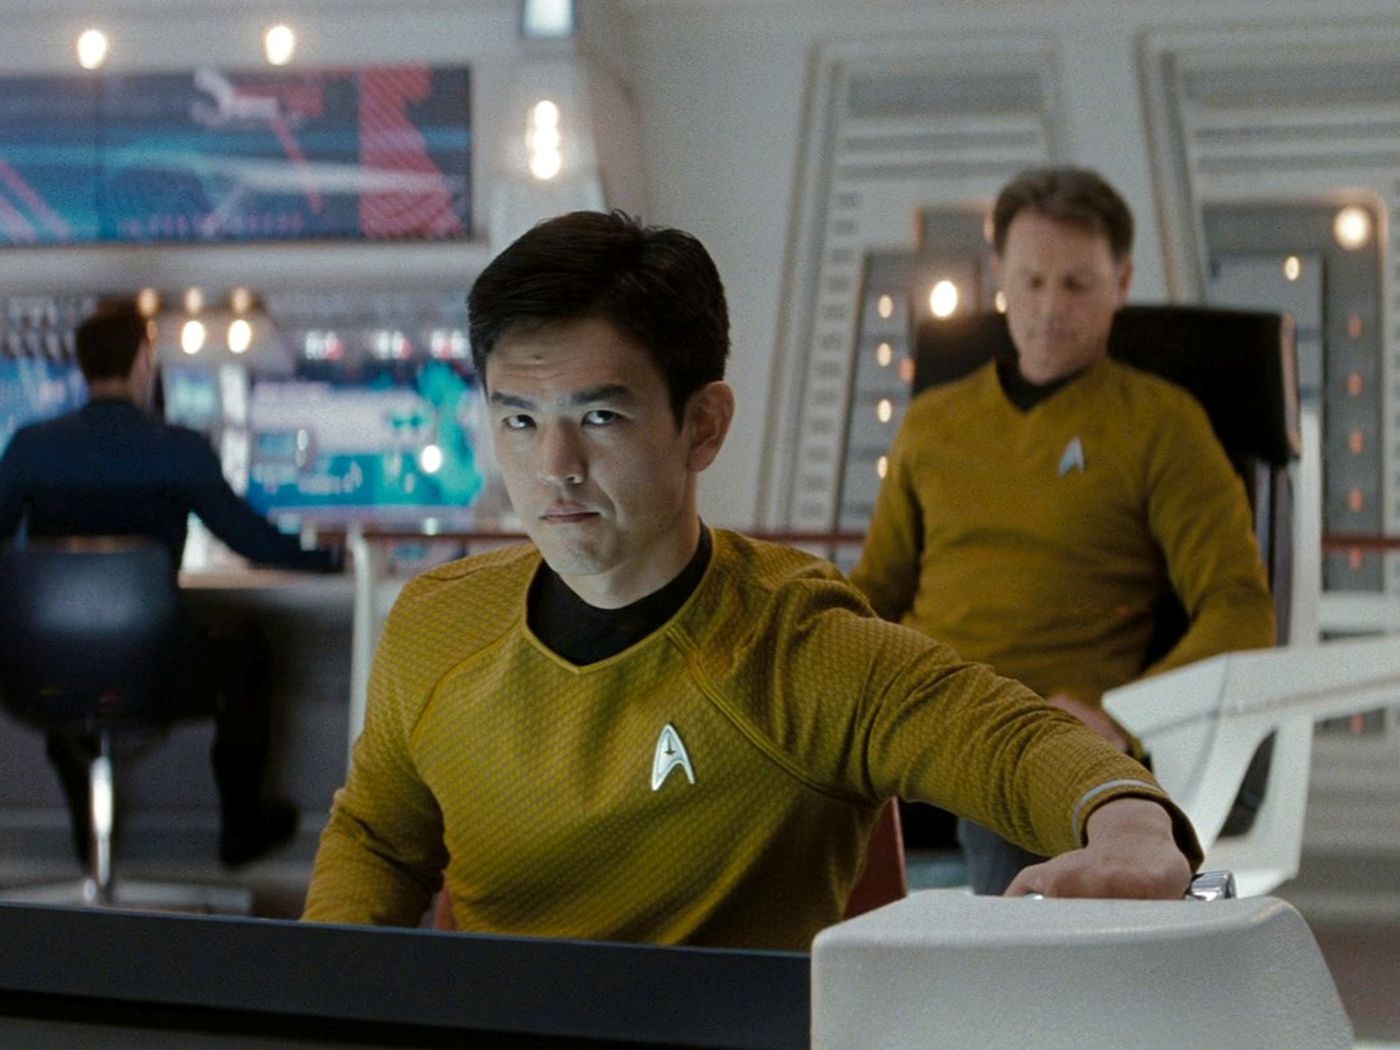 John Cho's Sulu is officially Star Trek's first openly gay character